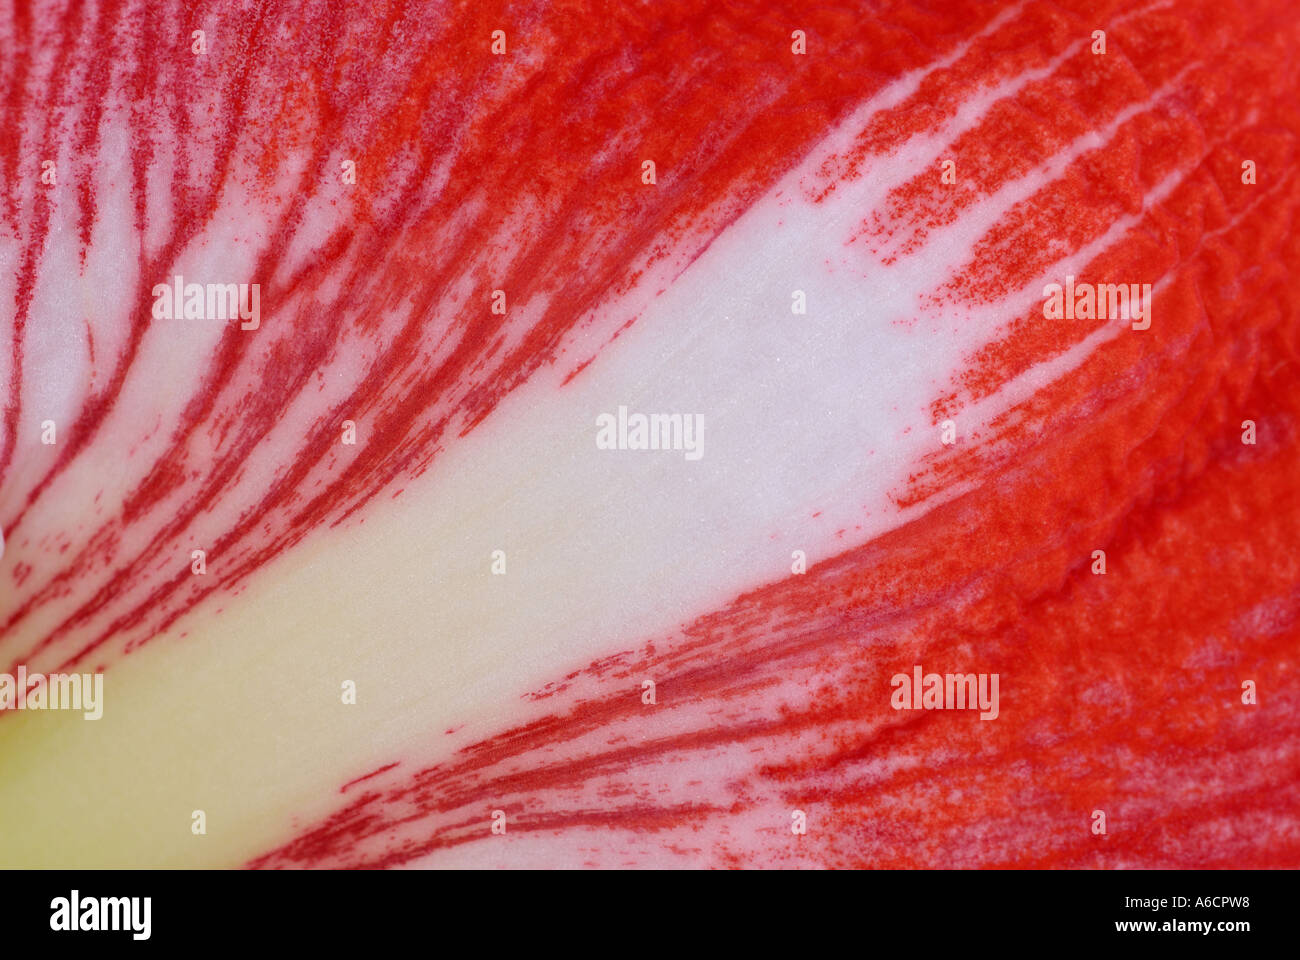 Close up abstract of a red Amaryllis flower petal Stock Photo